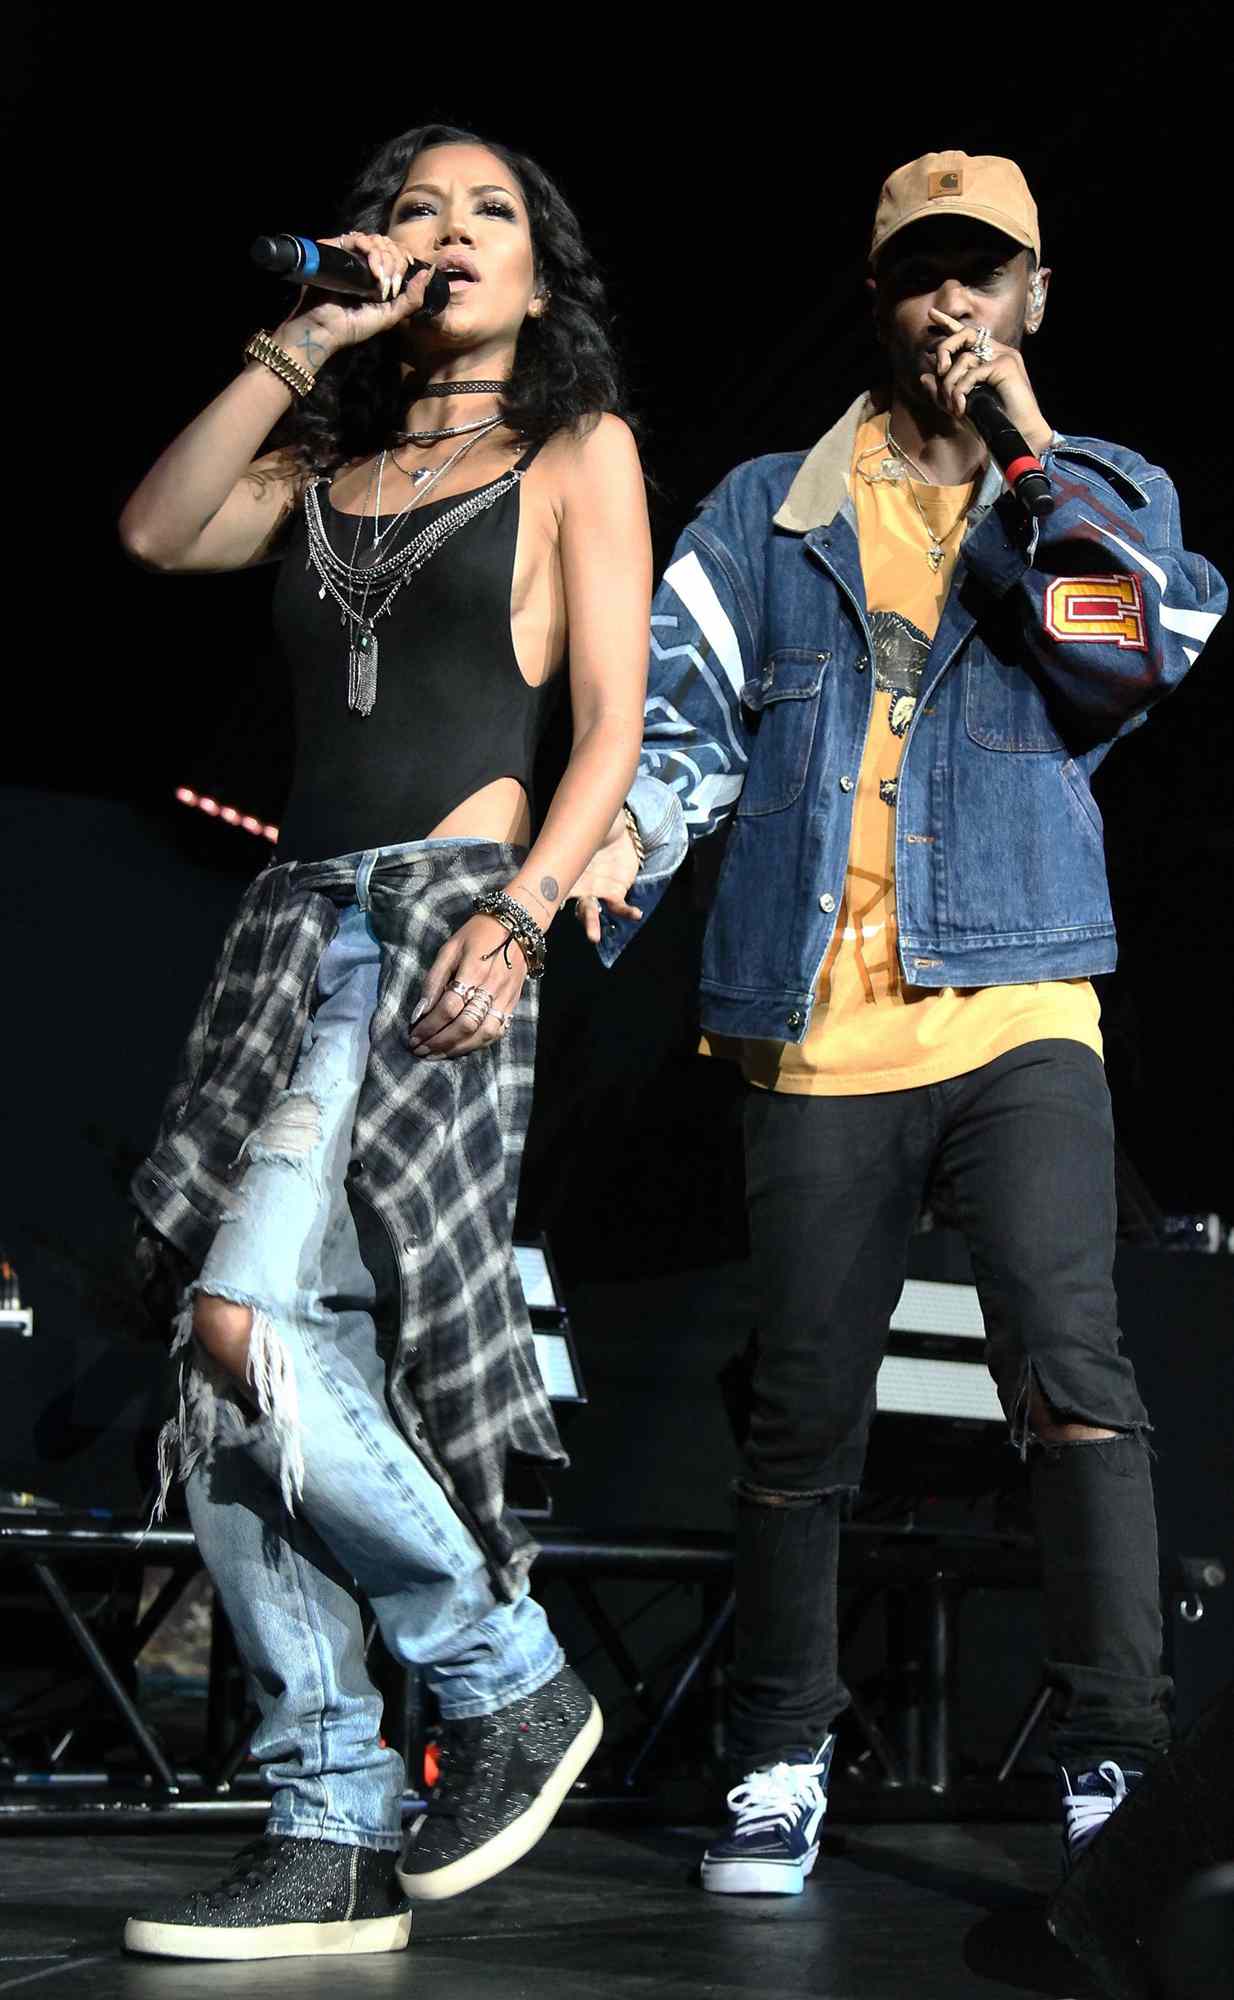 Jhene Aiko and Big Sean perform during the Power 106 Presents Powerhouse at Honda Center on June 3, 2016 in Anaheim, California